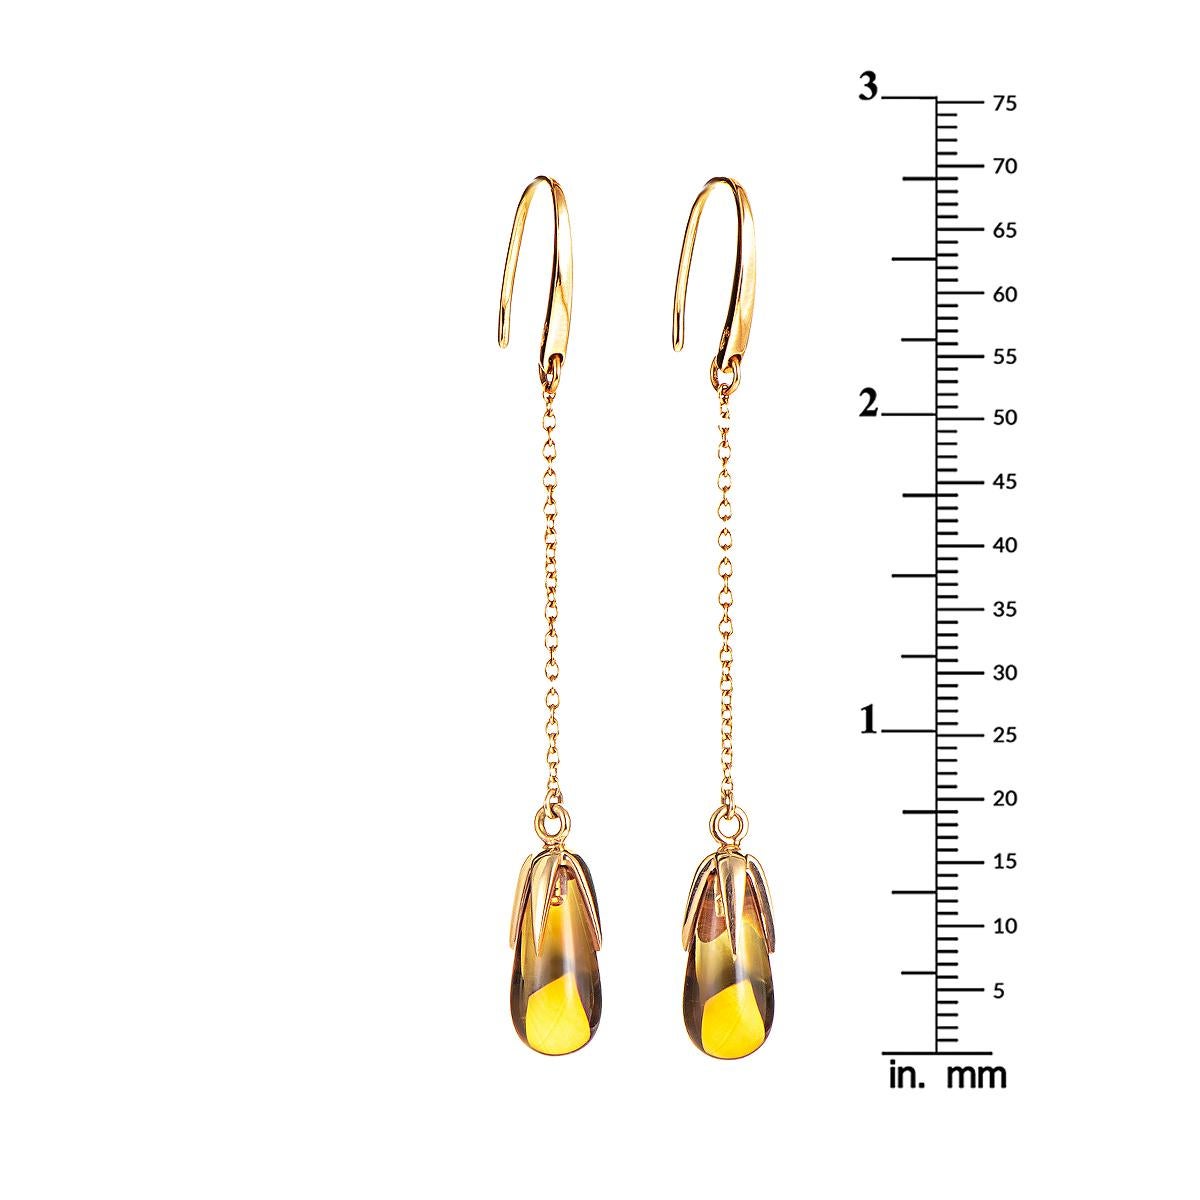 This pair of Pomellato Veleno earrings are gorgeous and lovely. They are made of 18K rose gold and have tear drop shaped citrine gemstones on a gold chain.
